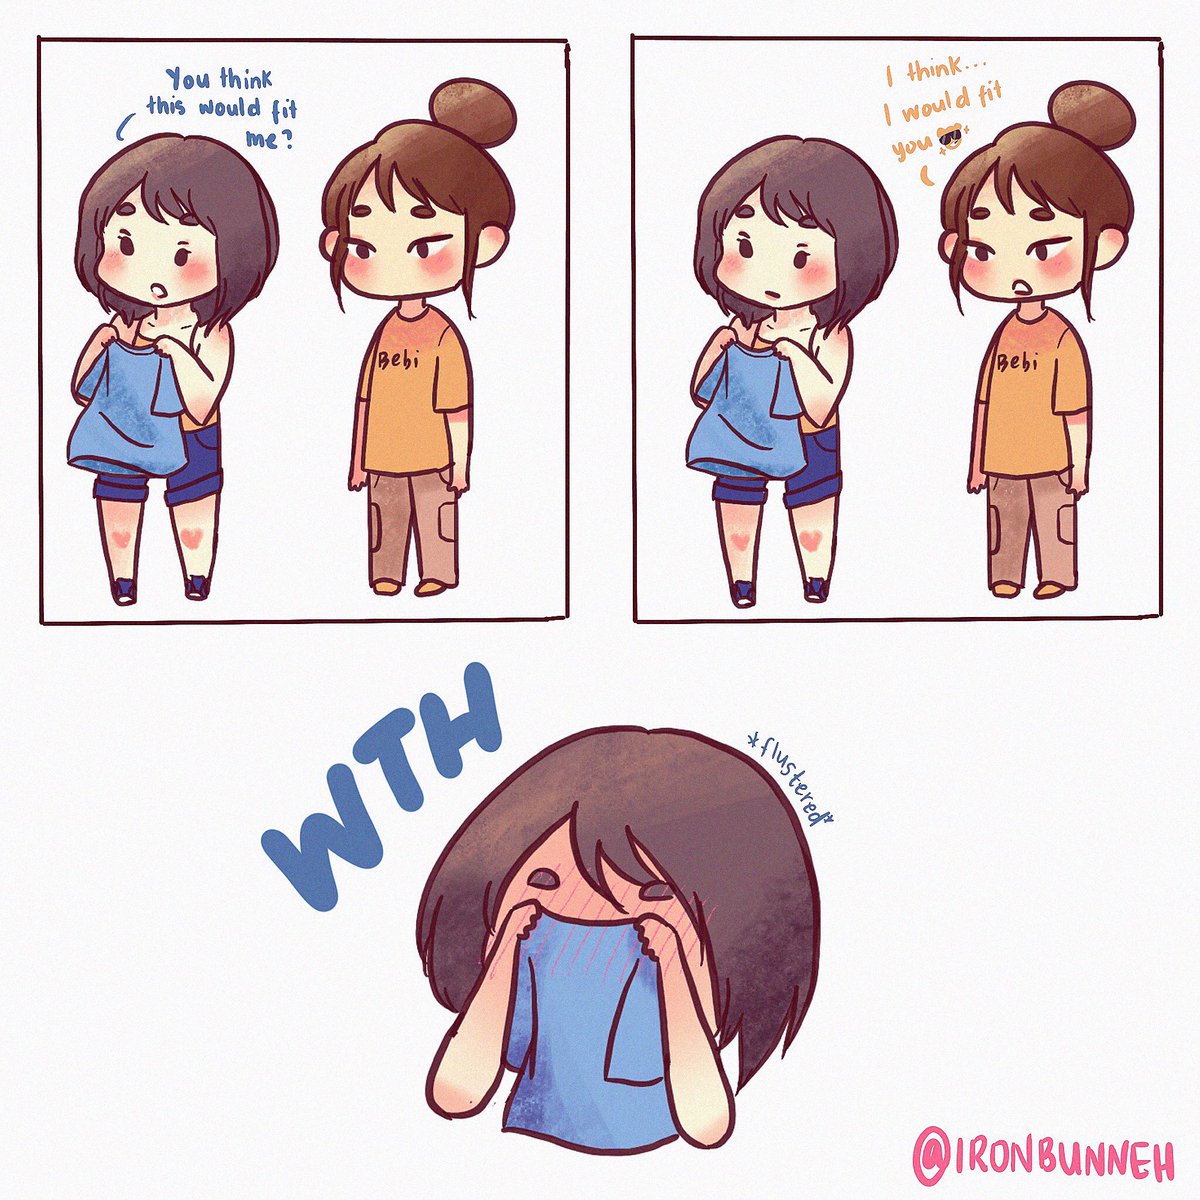 WenSeul Comic 20: Wan didnt expect that answerHahahahaha trying my best to get back to my groove bc wenseul’s been feeding me HMMMM